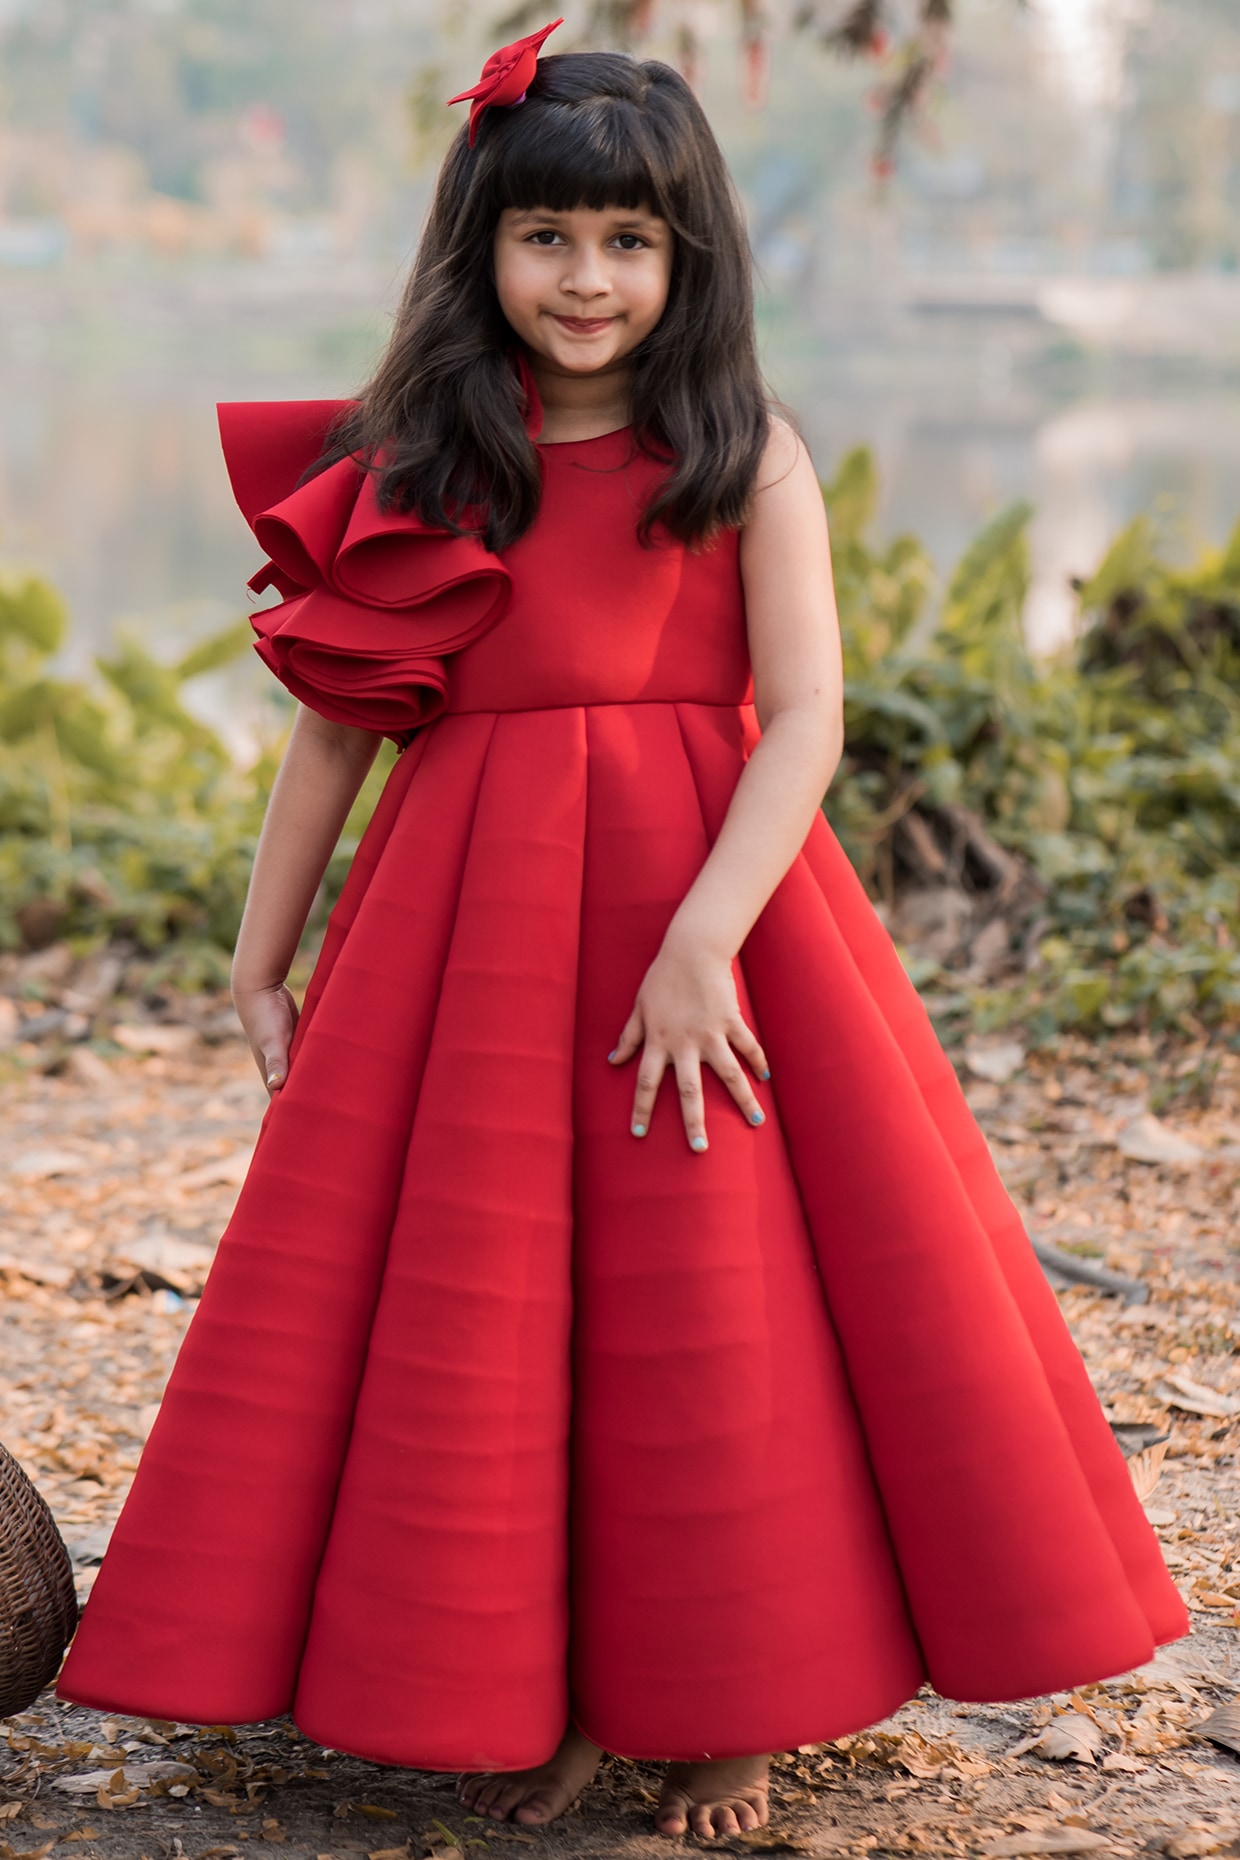 Dress for Girls 10-11 Years | Kids Party Dresses Tagged 